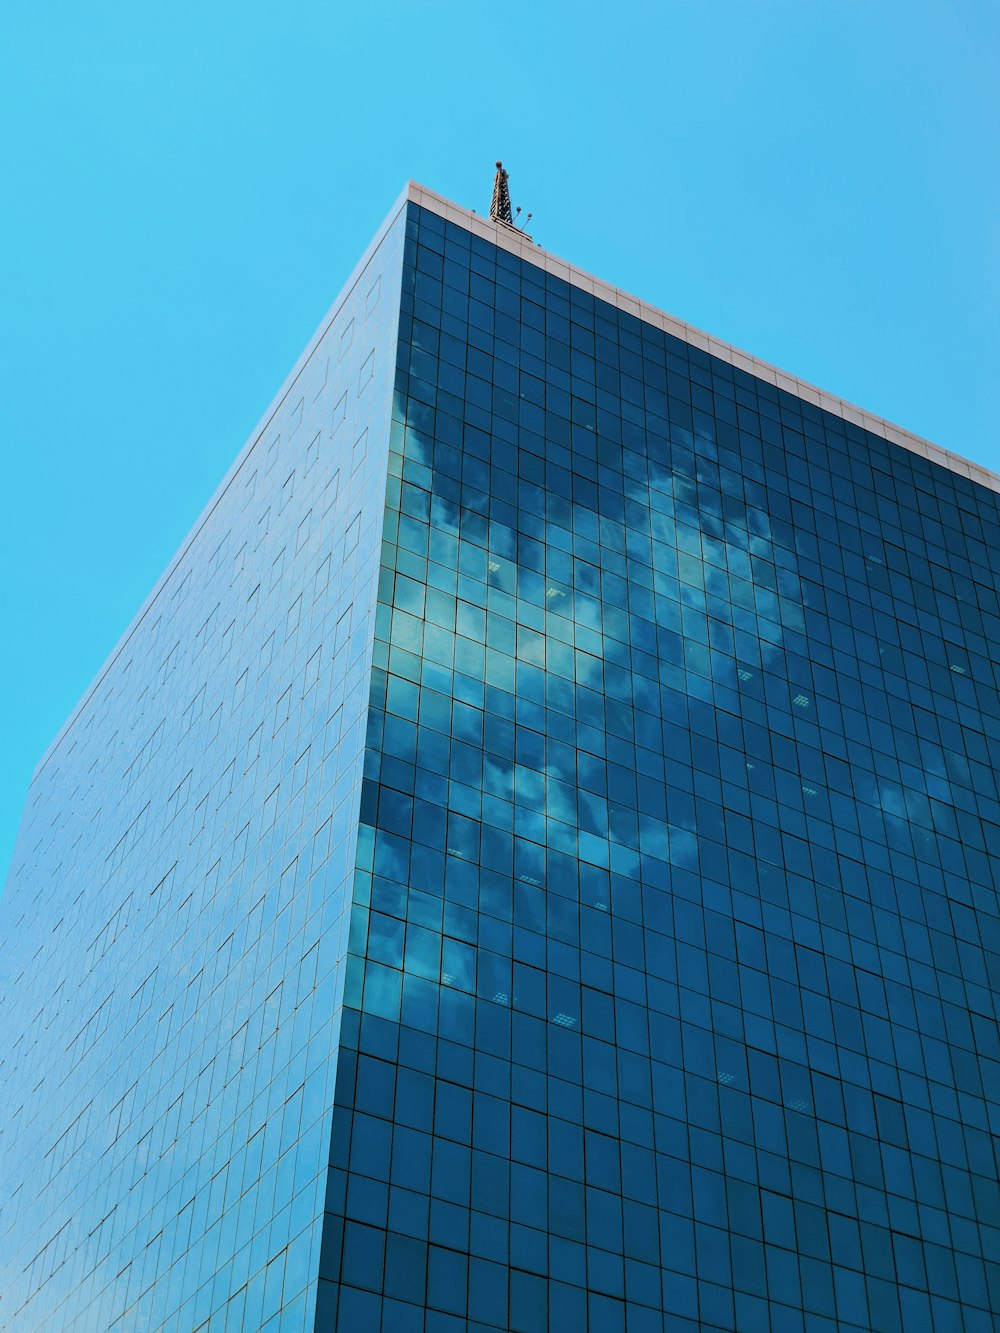 blue and white concrete building under blue sky during daytime